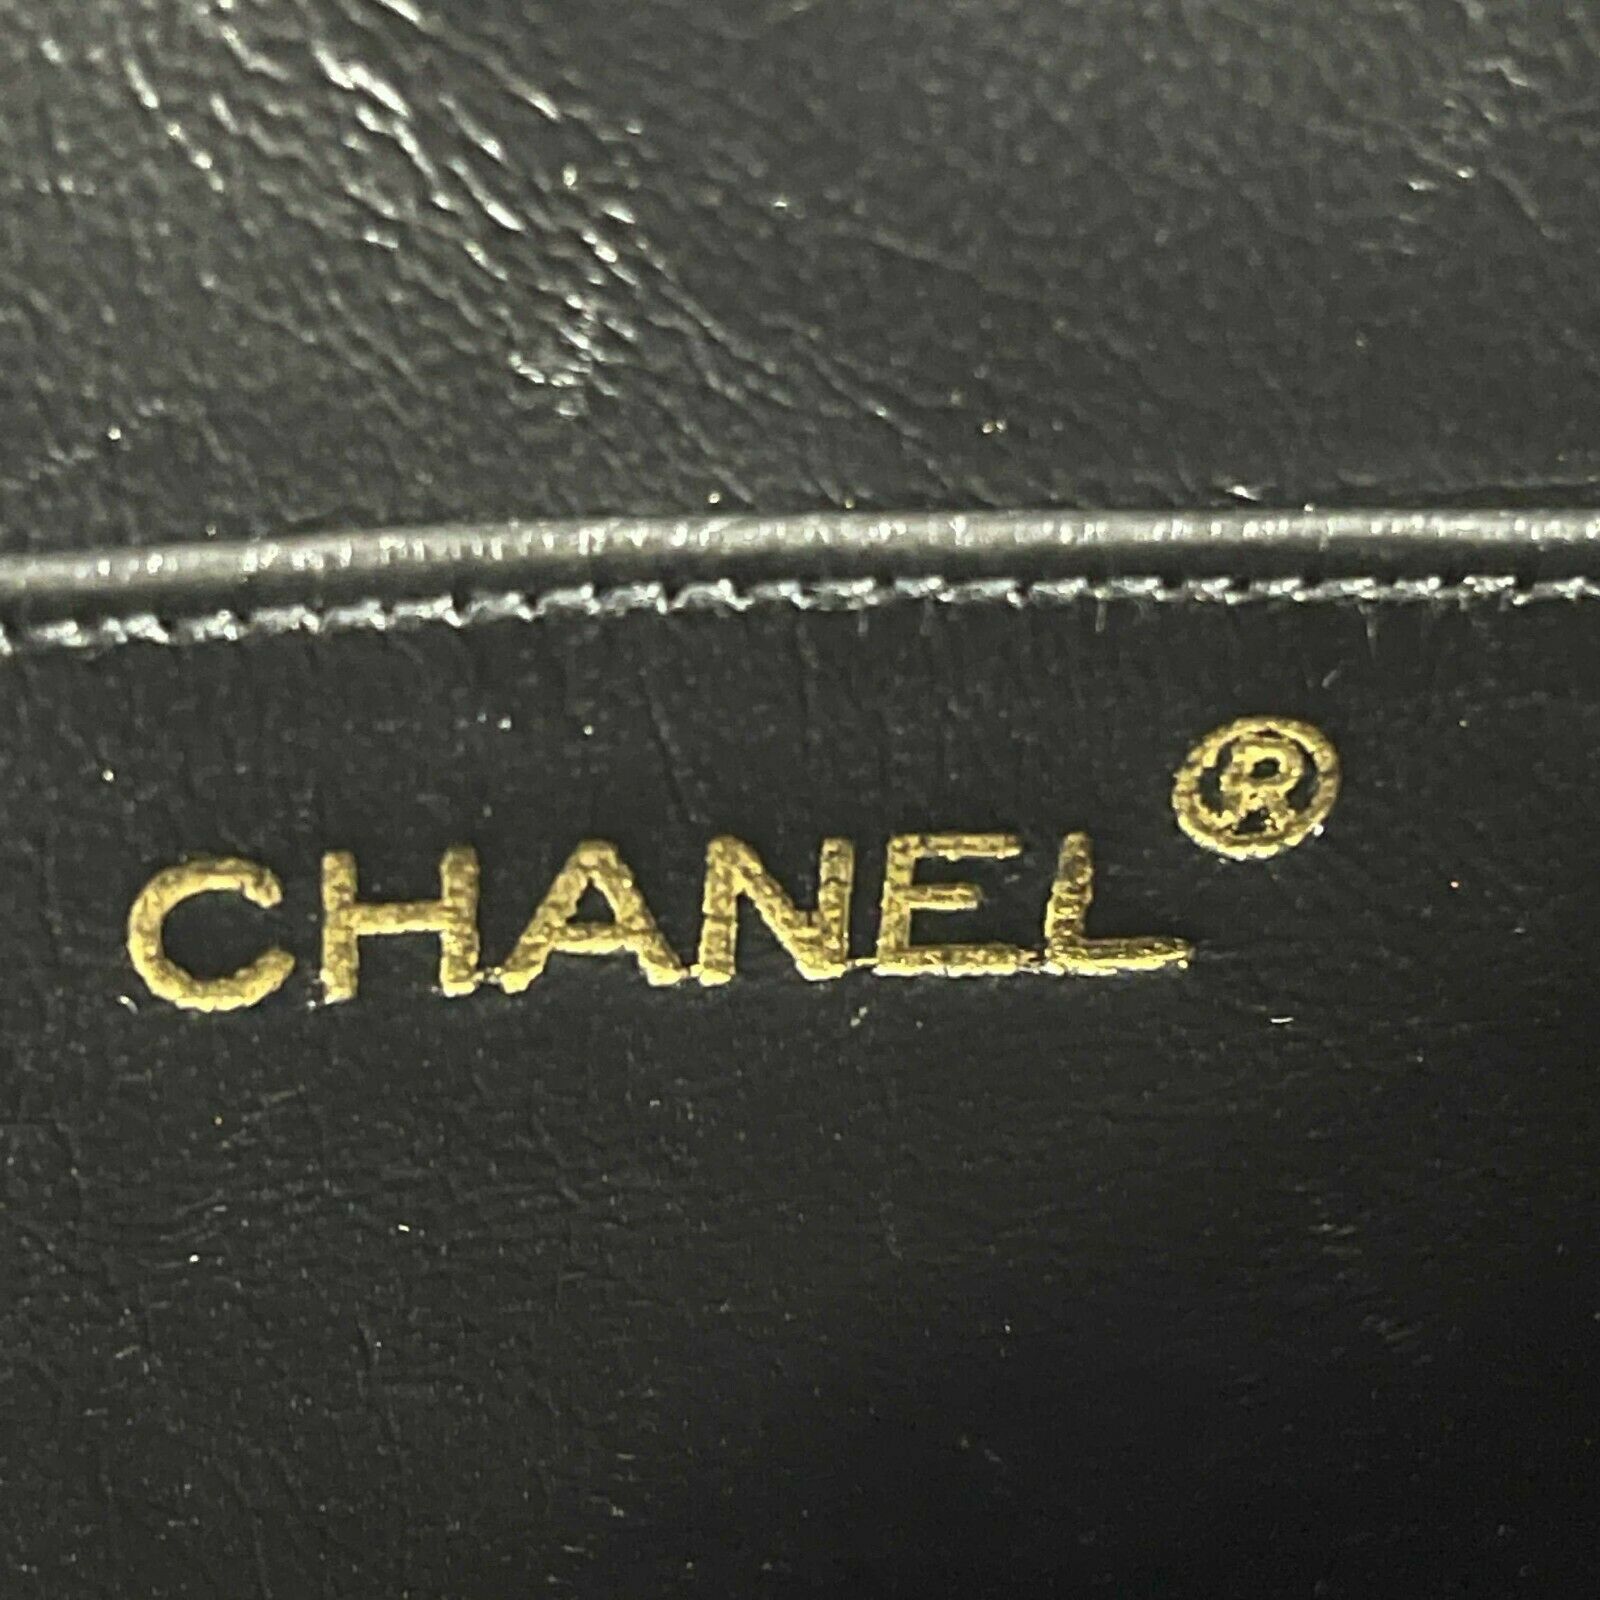 CHANEL - 80s Quilted Black / Gold Chain Threaded Small Lambskin Crossb -  BougieHabit